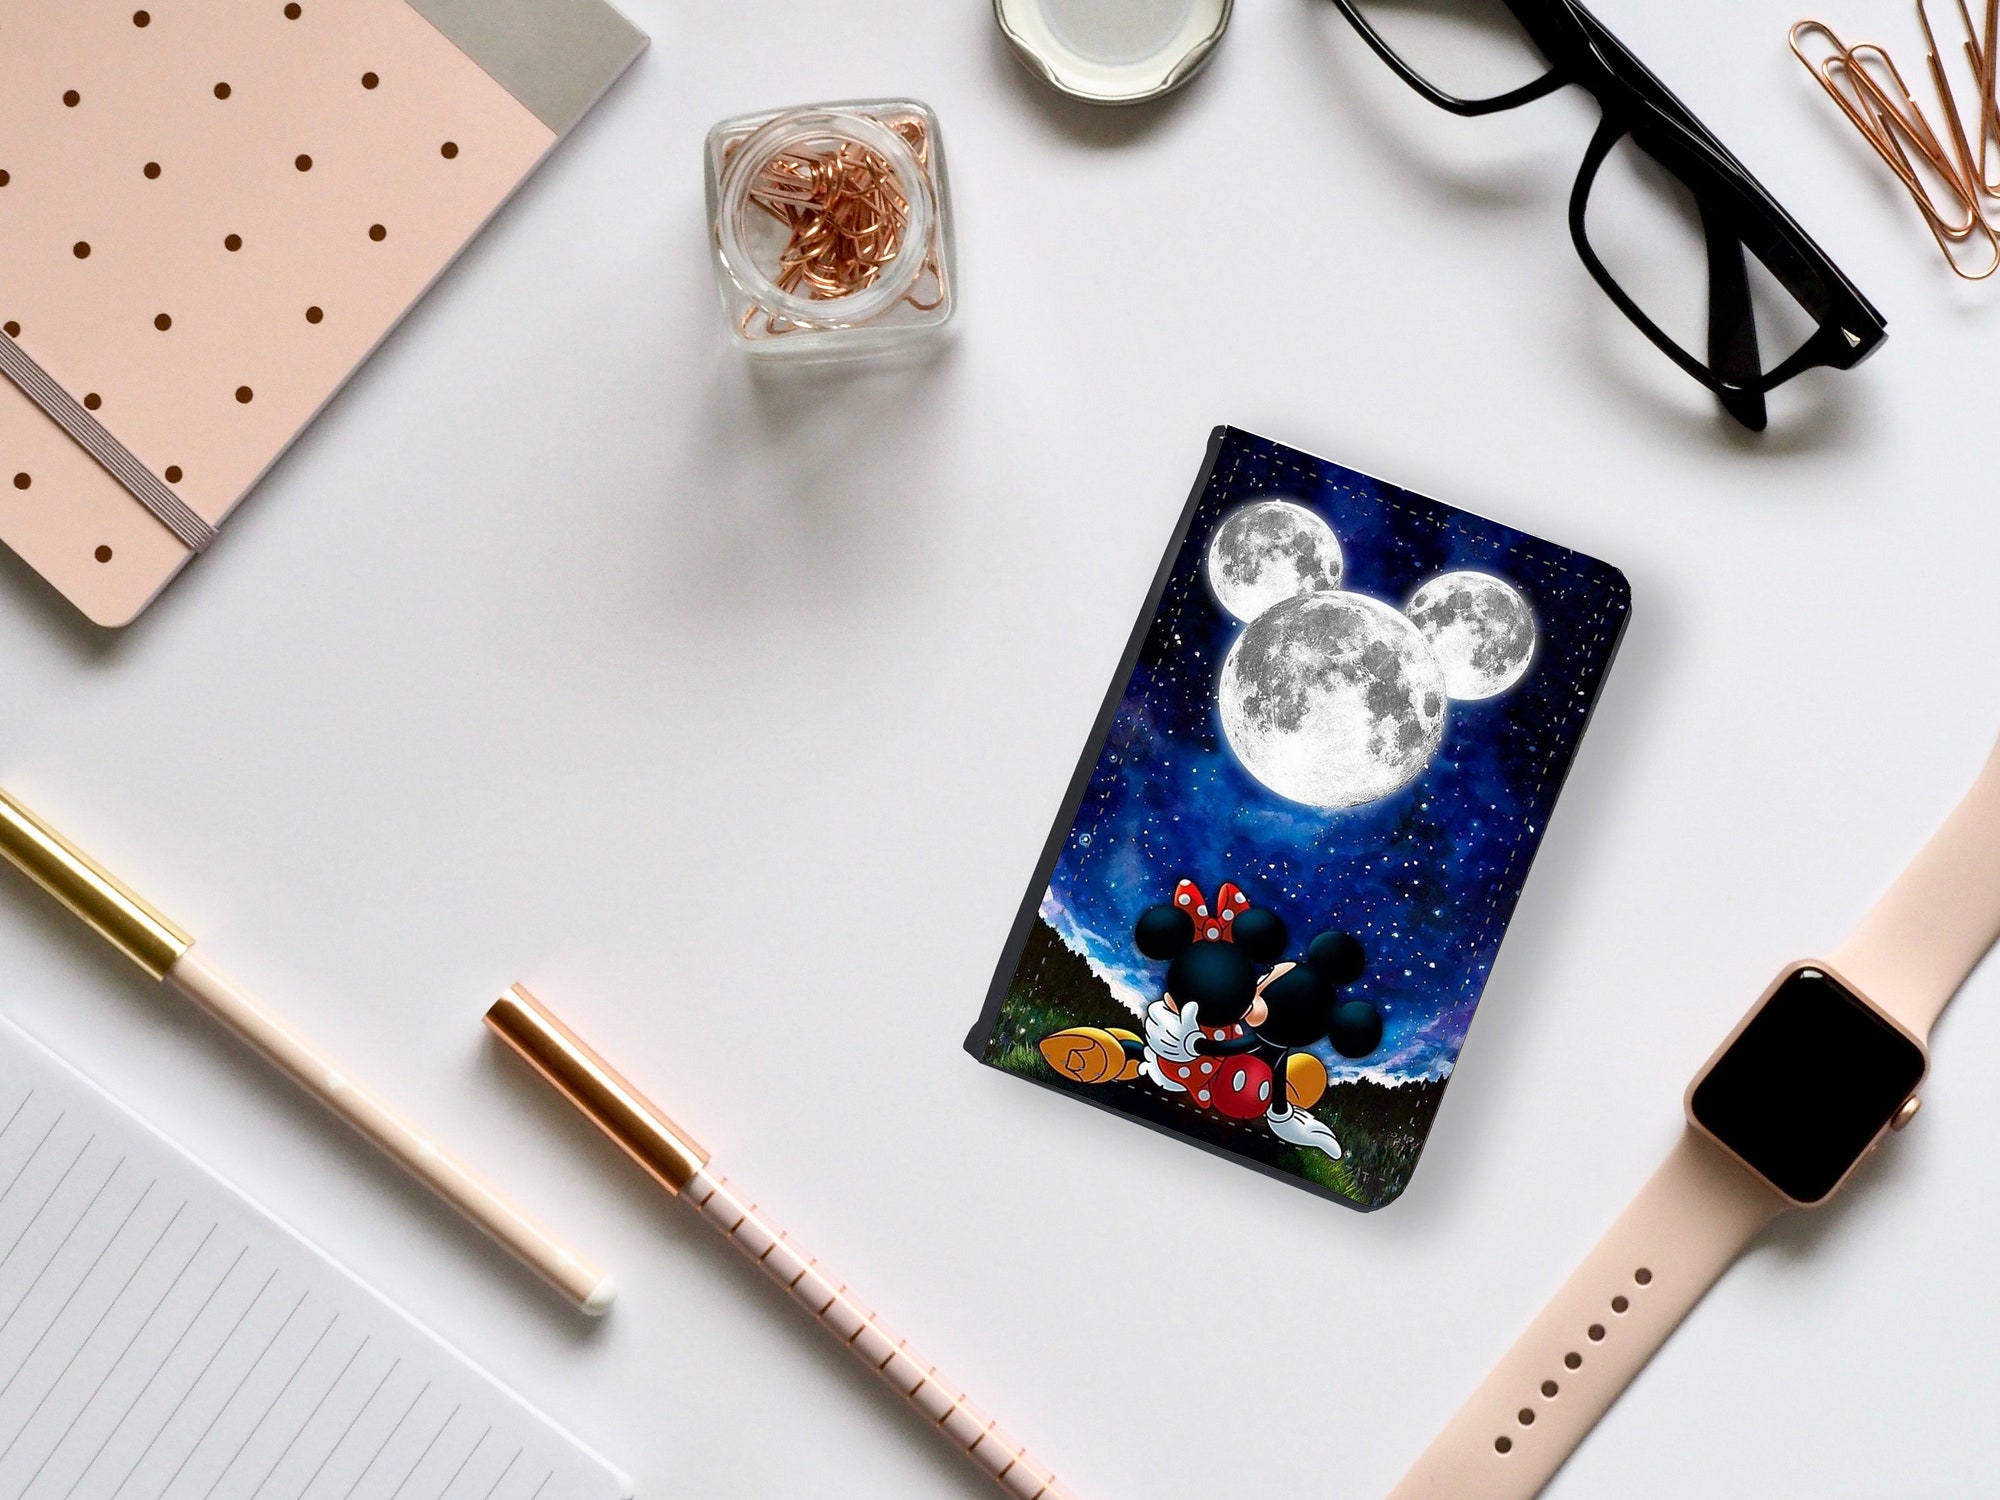 Disney Love Mickey Mouse Passport Cover